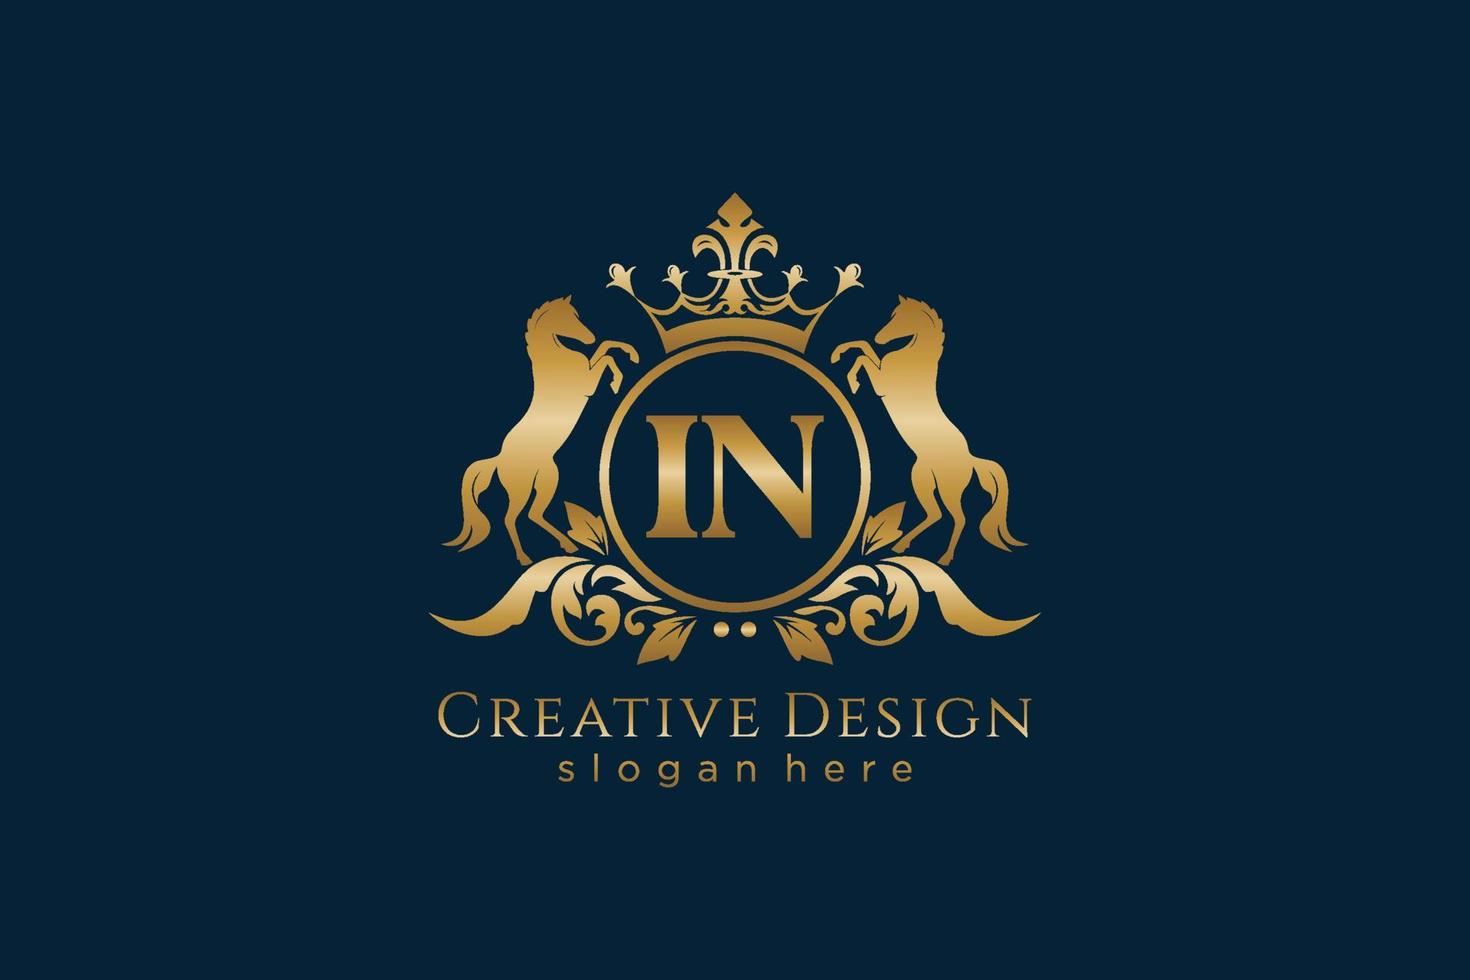 initial IN Retro golden crest with circle and two horses, badge template with scrolls and royal crown - perfect for luxurious branding projects vector